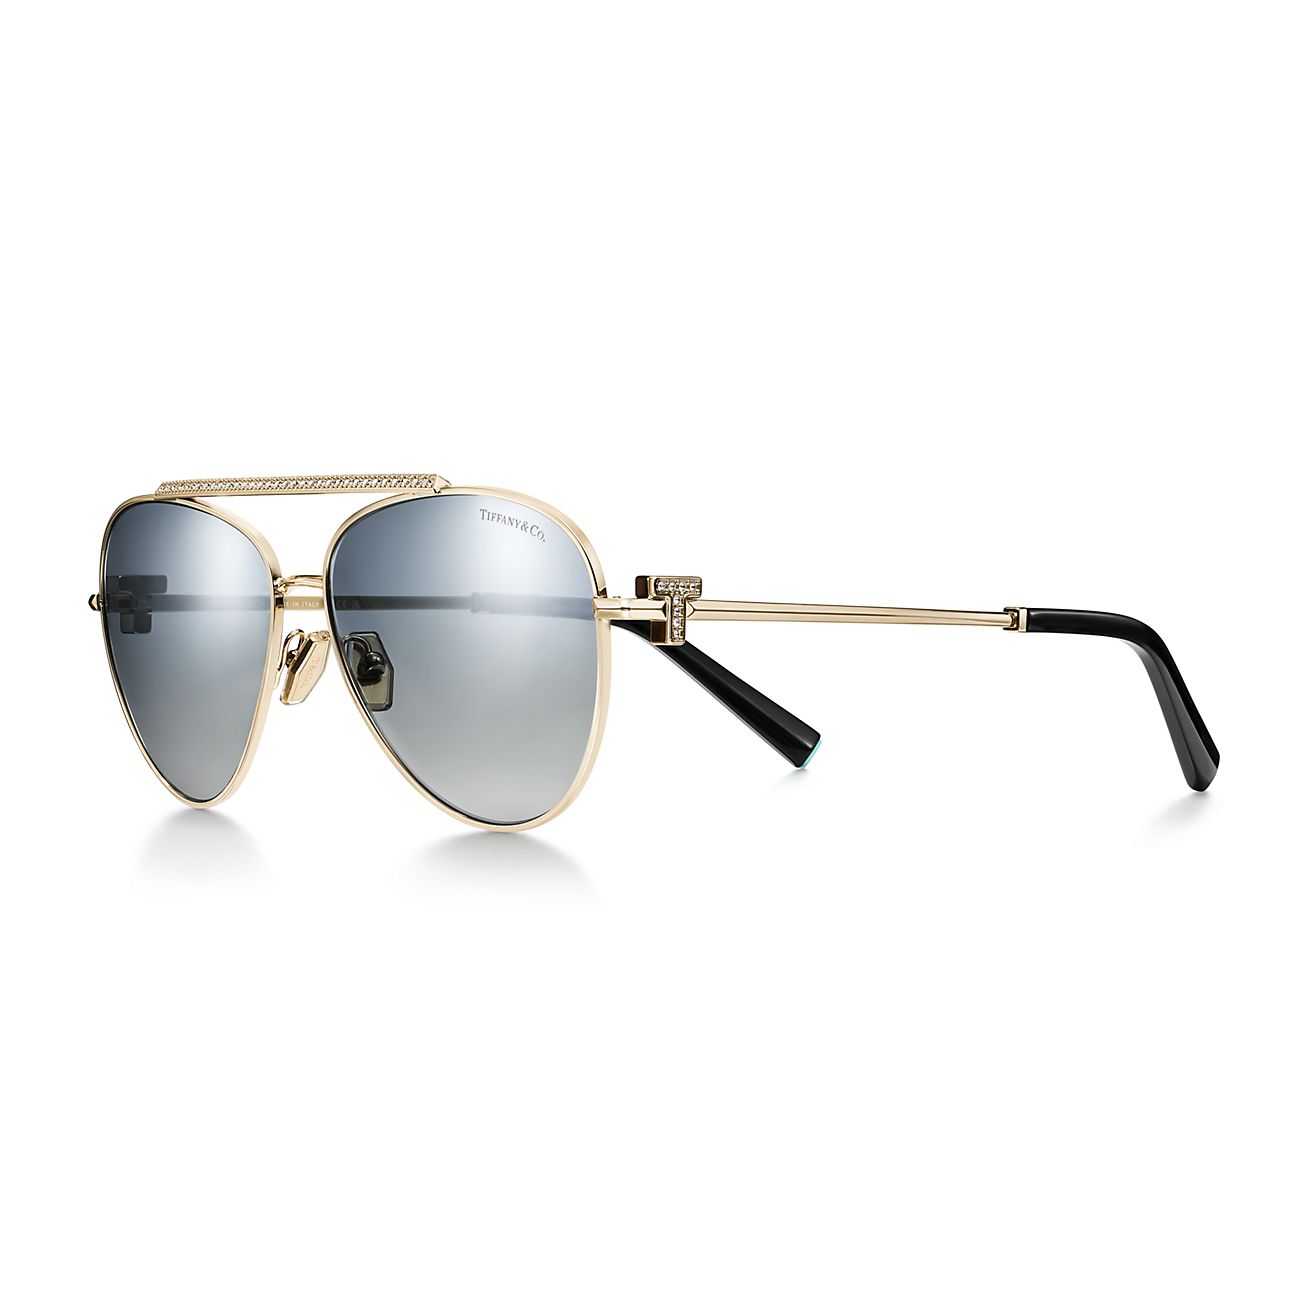 Tiffany T Sunglasses in Pale Gold-colored Metal with Gradient Blue Lenses |  Tiffany & Co.